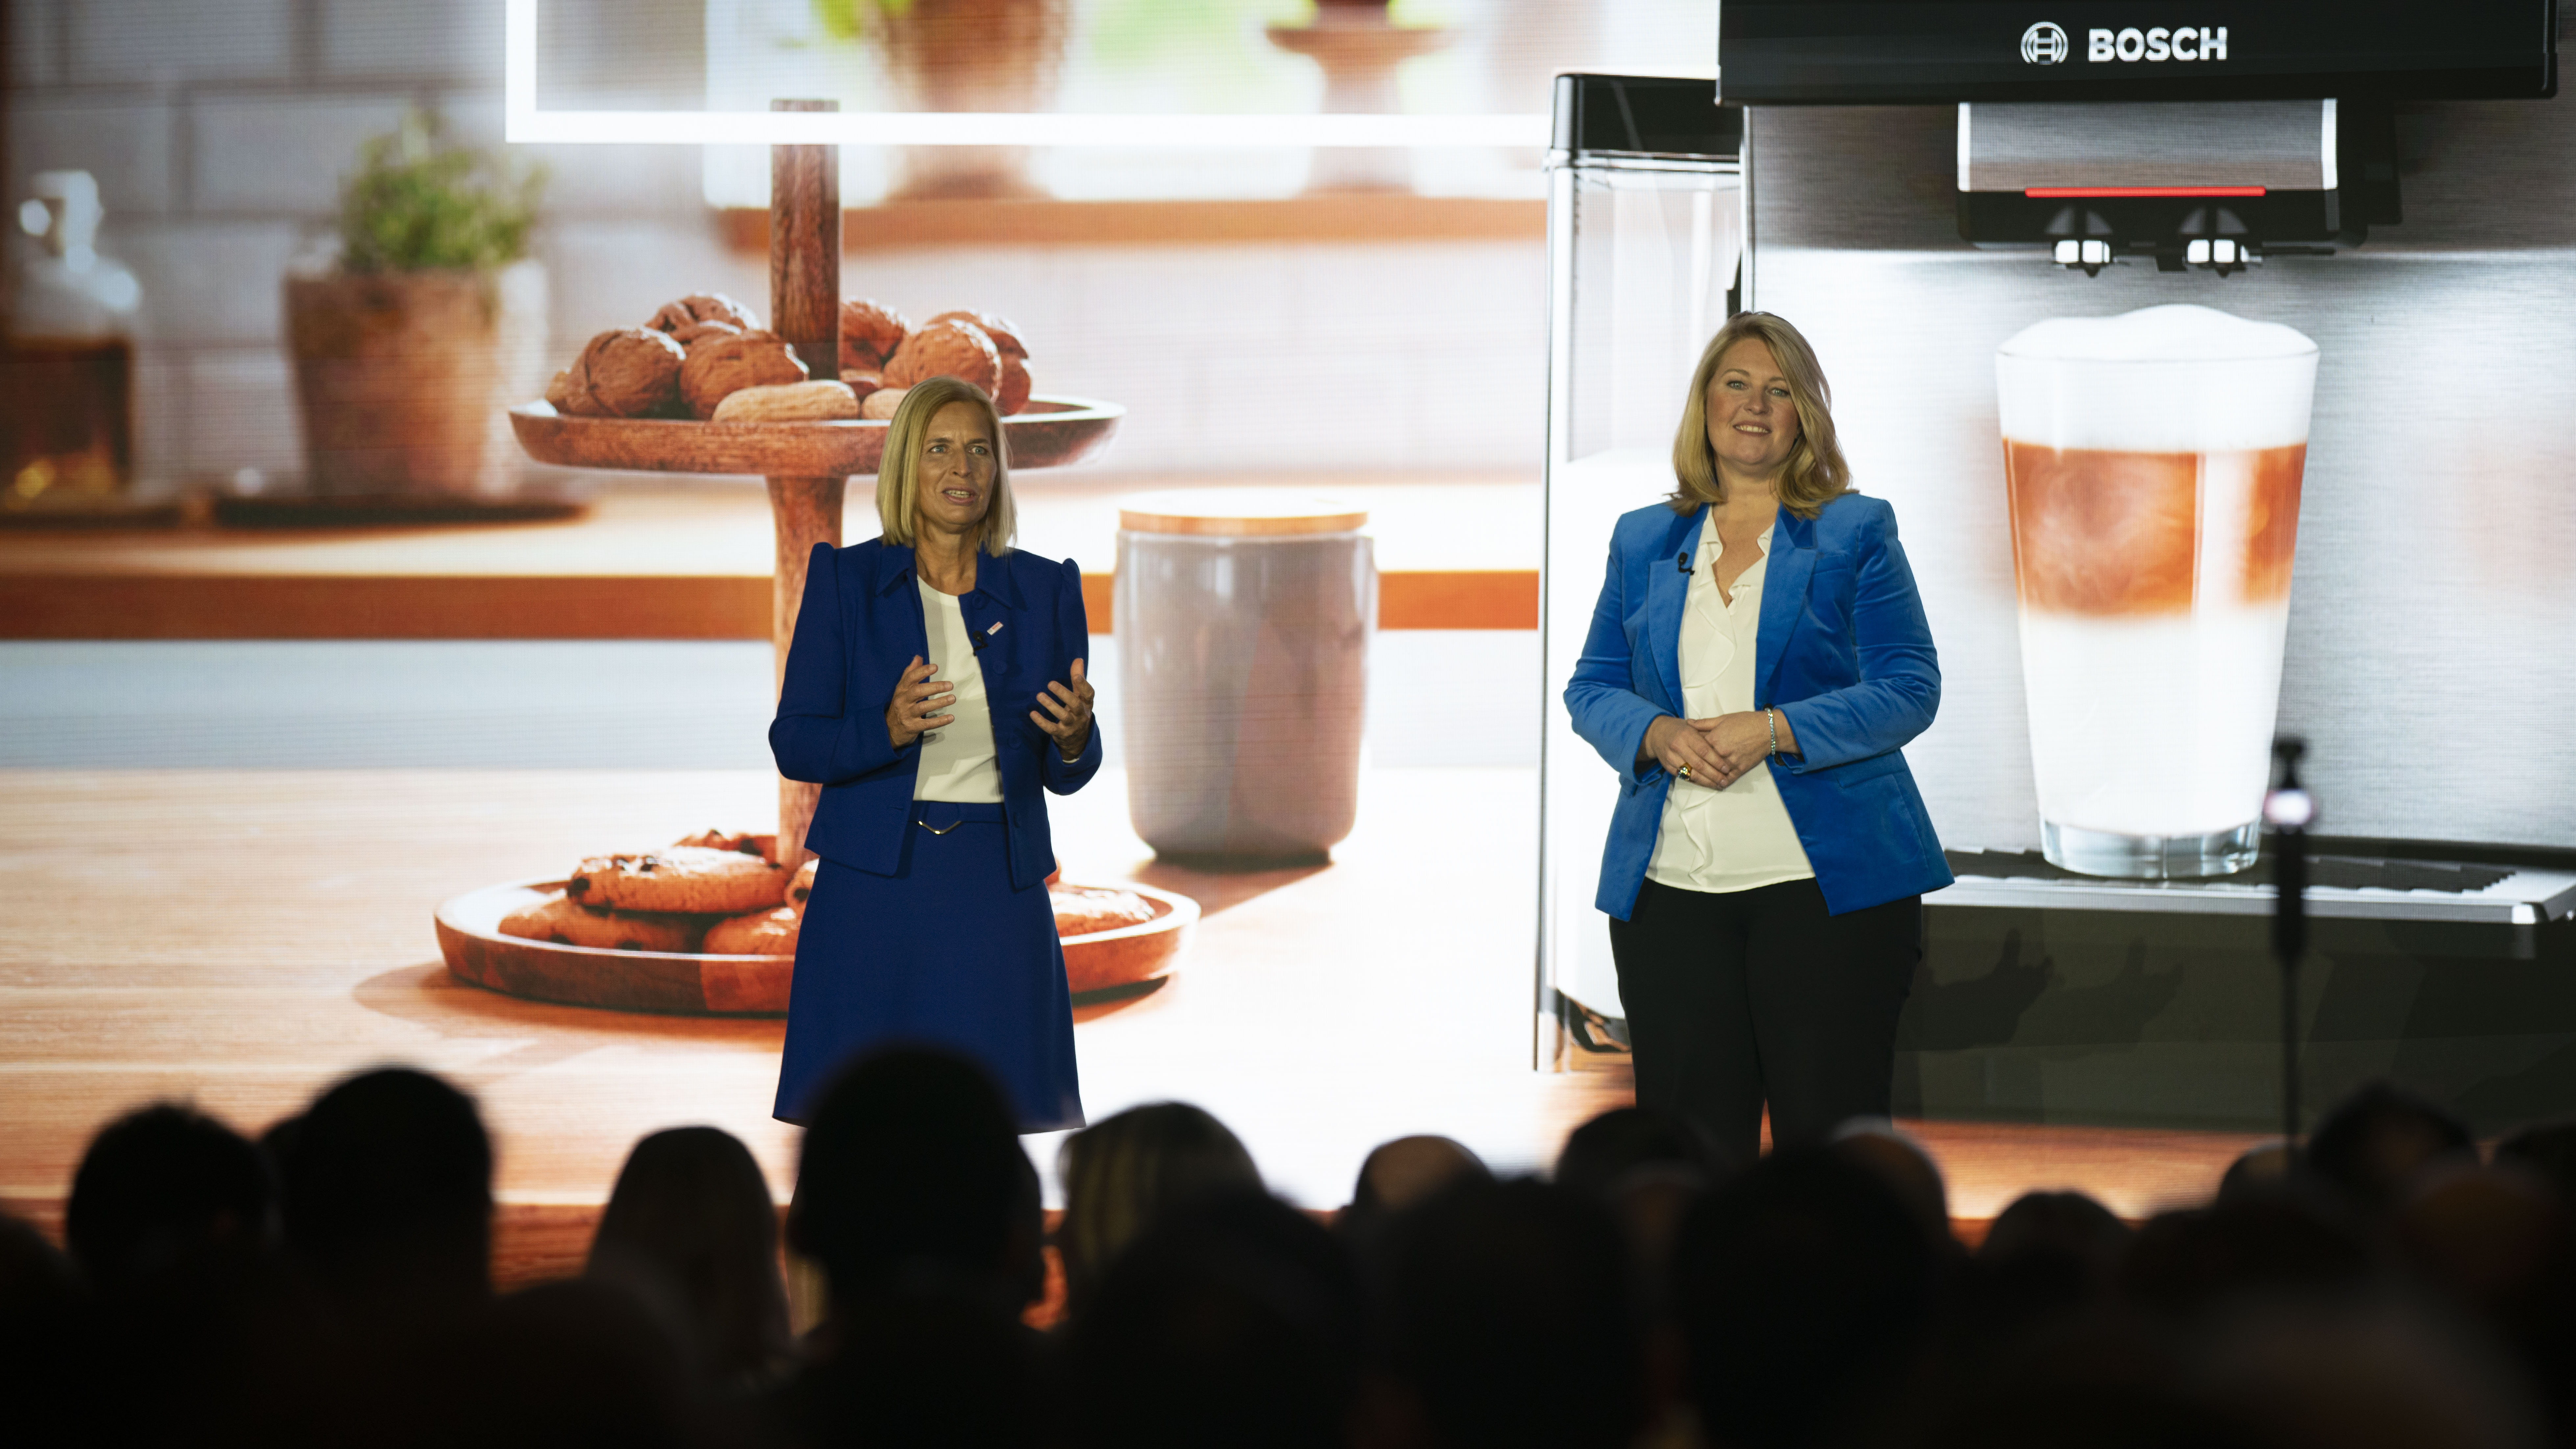 from left: Tanja Rückert (member of the Bosch board of management) and Wendy Bauer (vice president and general manager of automotive and manufacturing at AWS)